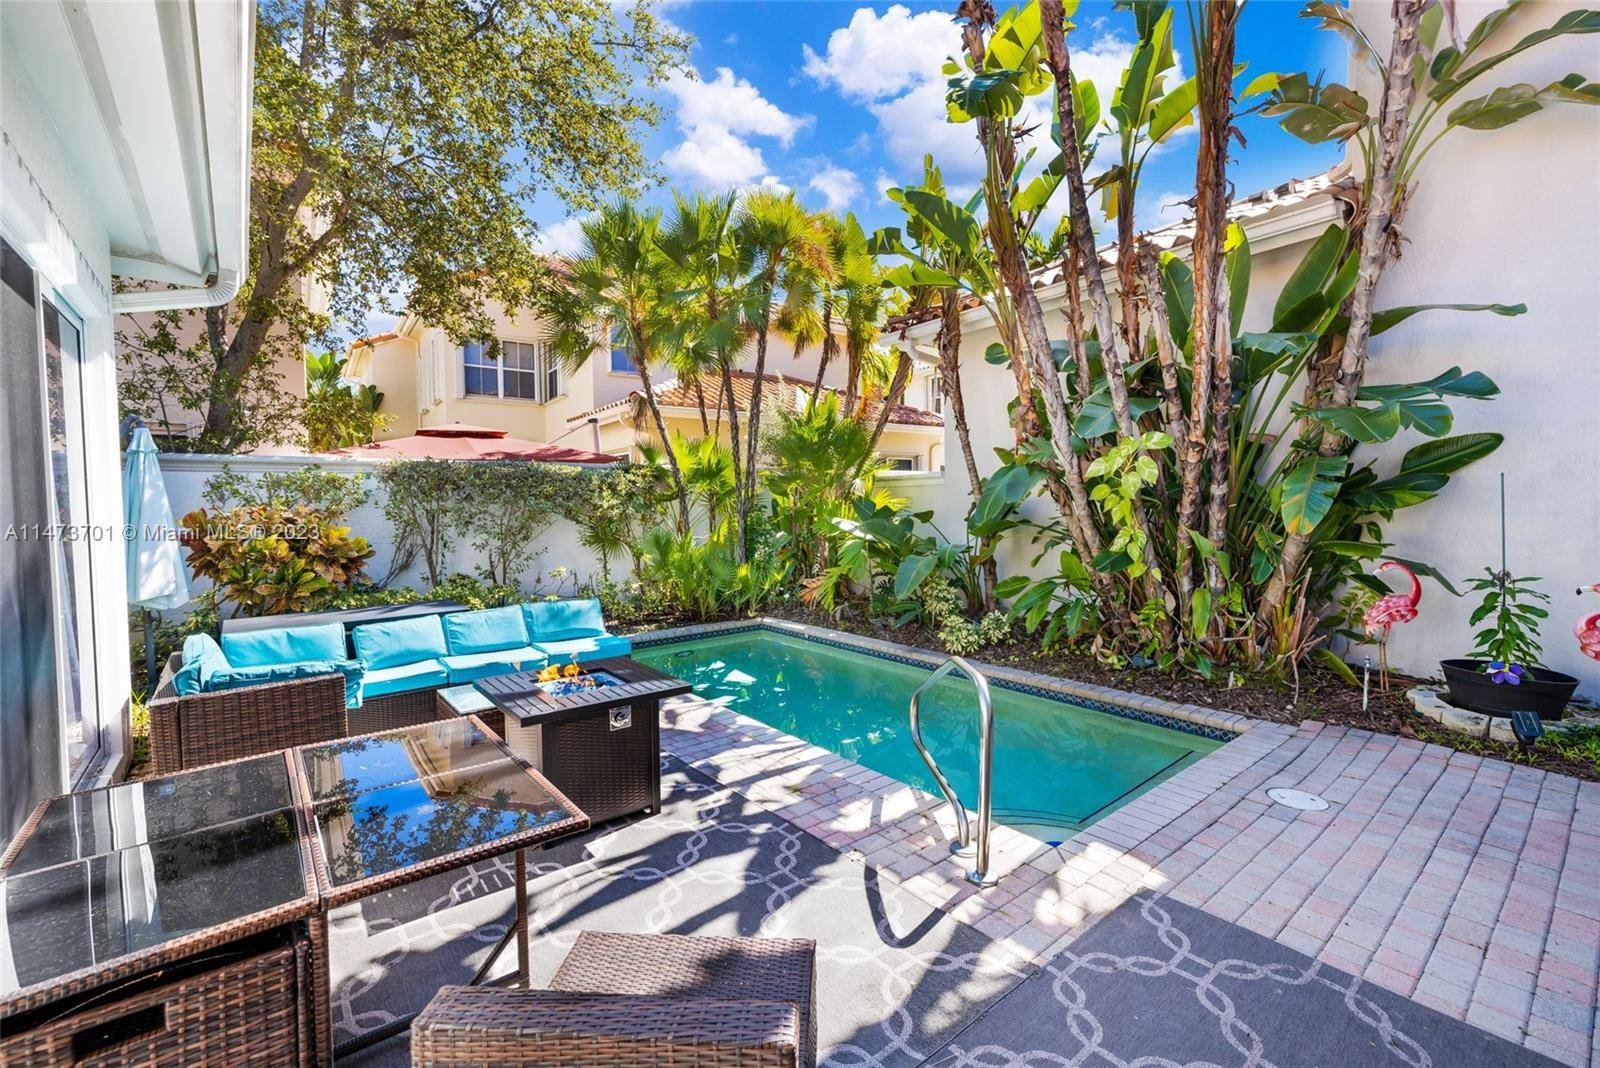 YOU MUST SEE THIS MAGNIFICENT, LIGHT AND BRIGHT 3 BED 2 BATH HOUSE IN EXCLUSIVE GATED COMMUNITY OF HARBOR ISLANDS.